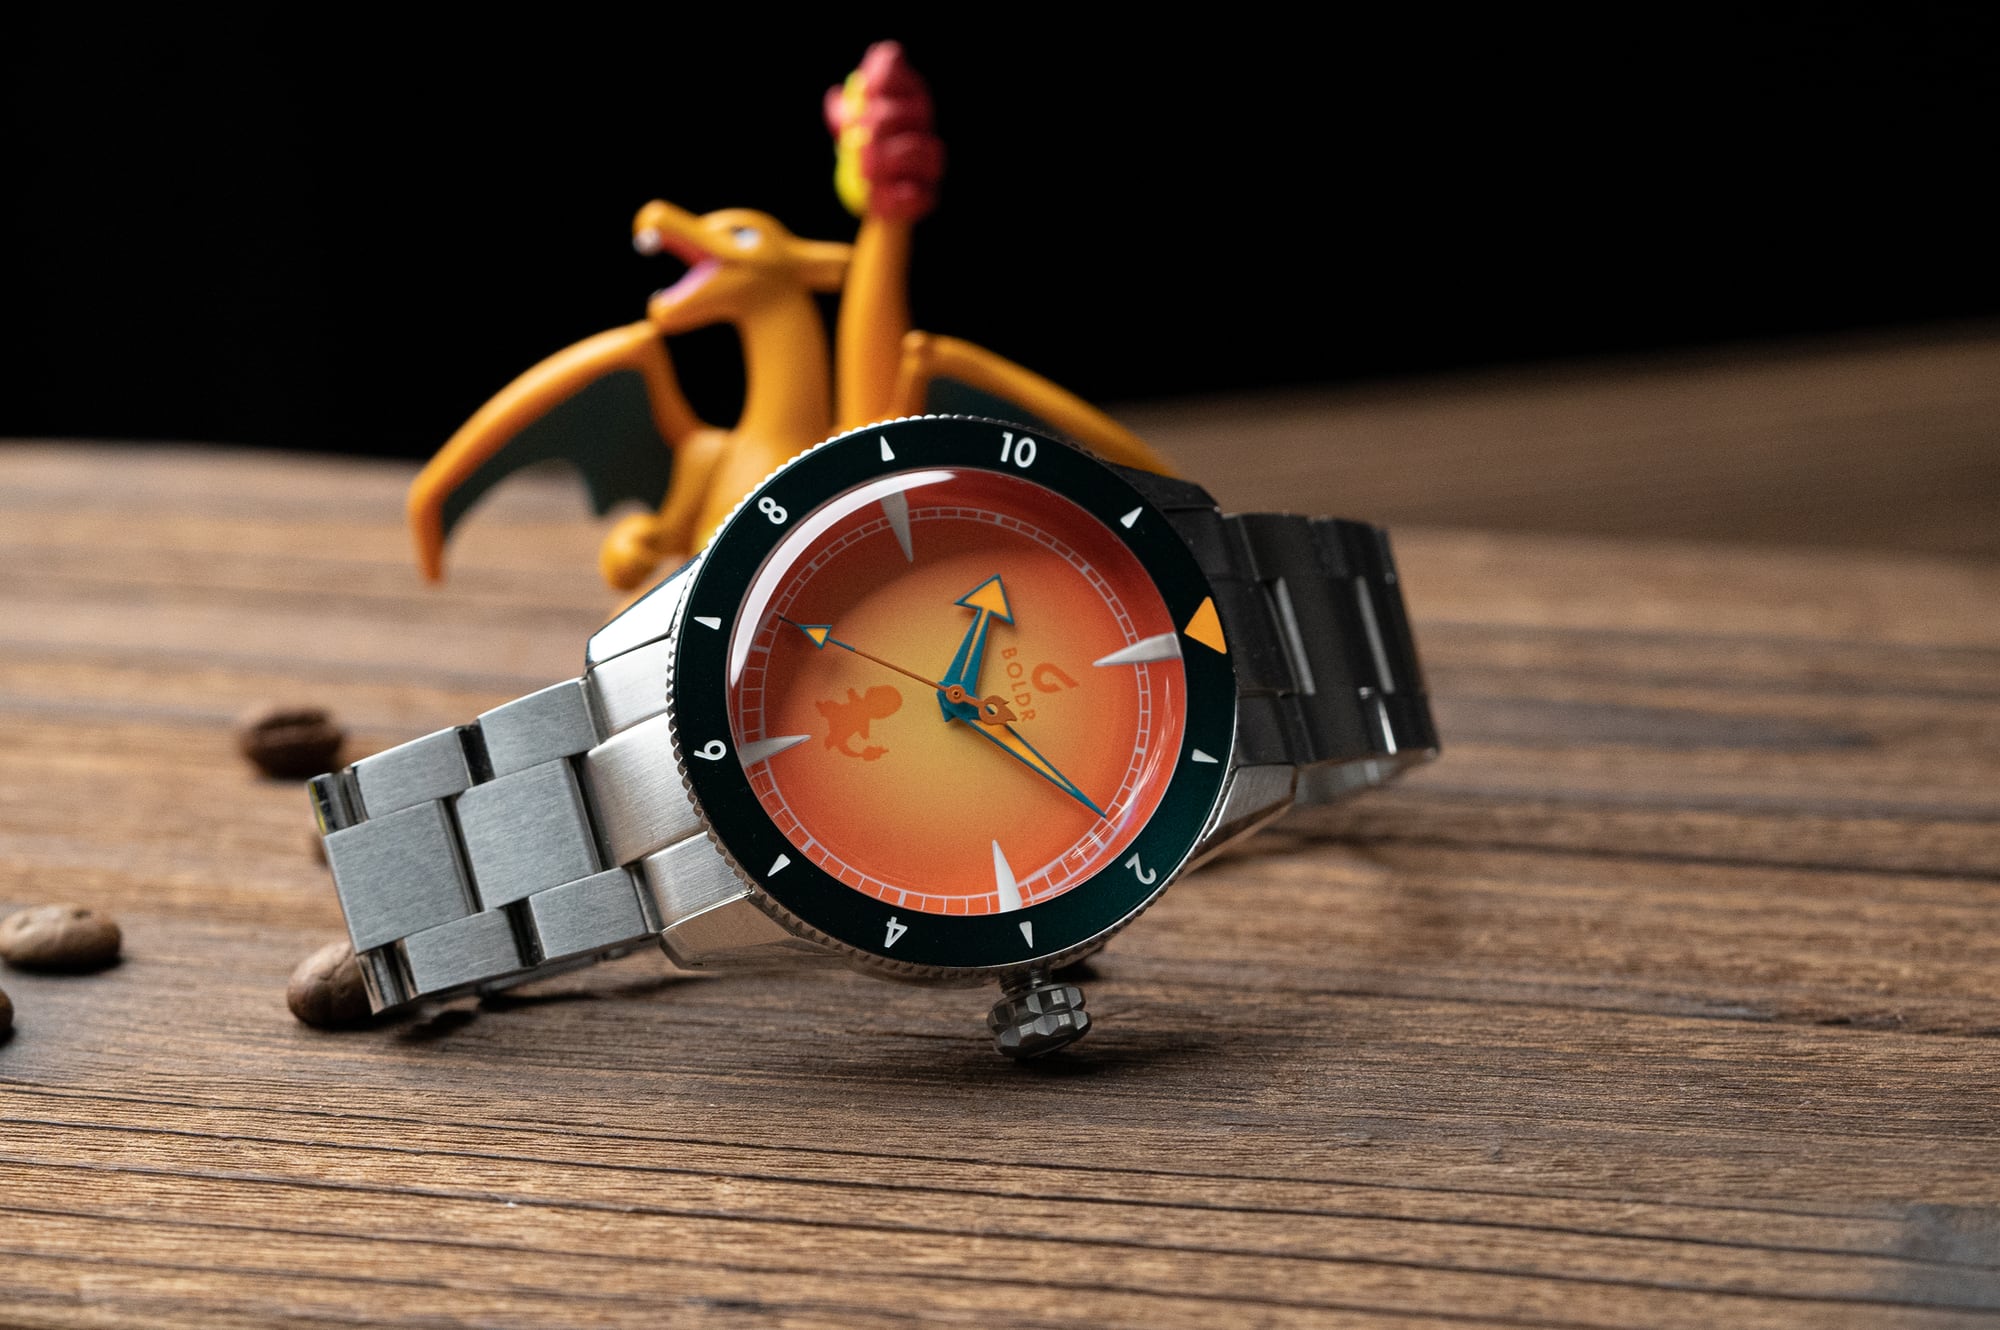 BOLDR Charizard Review: The Pokémon watch to be taken seriously